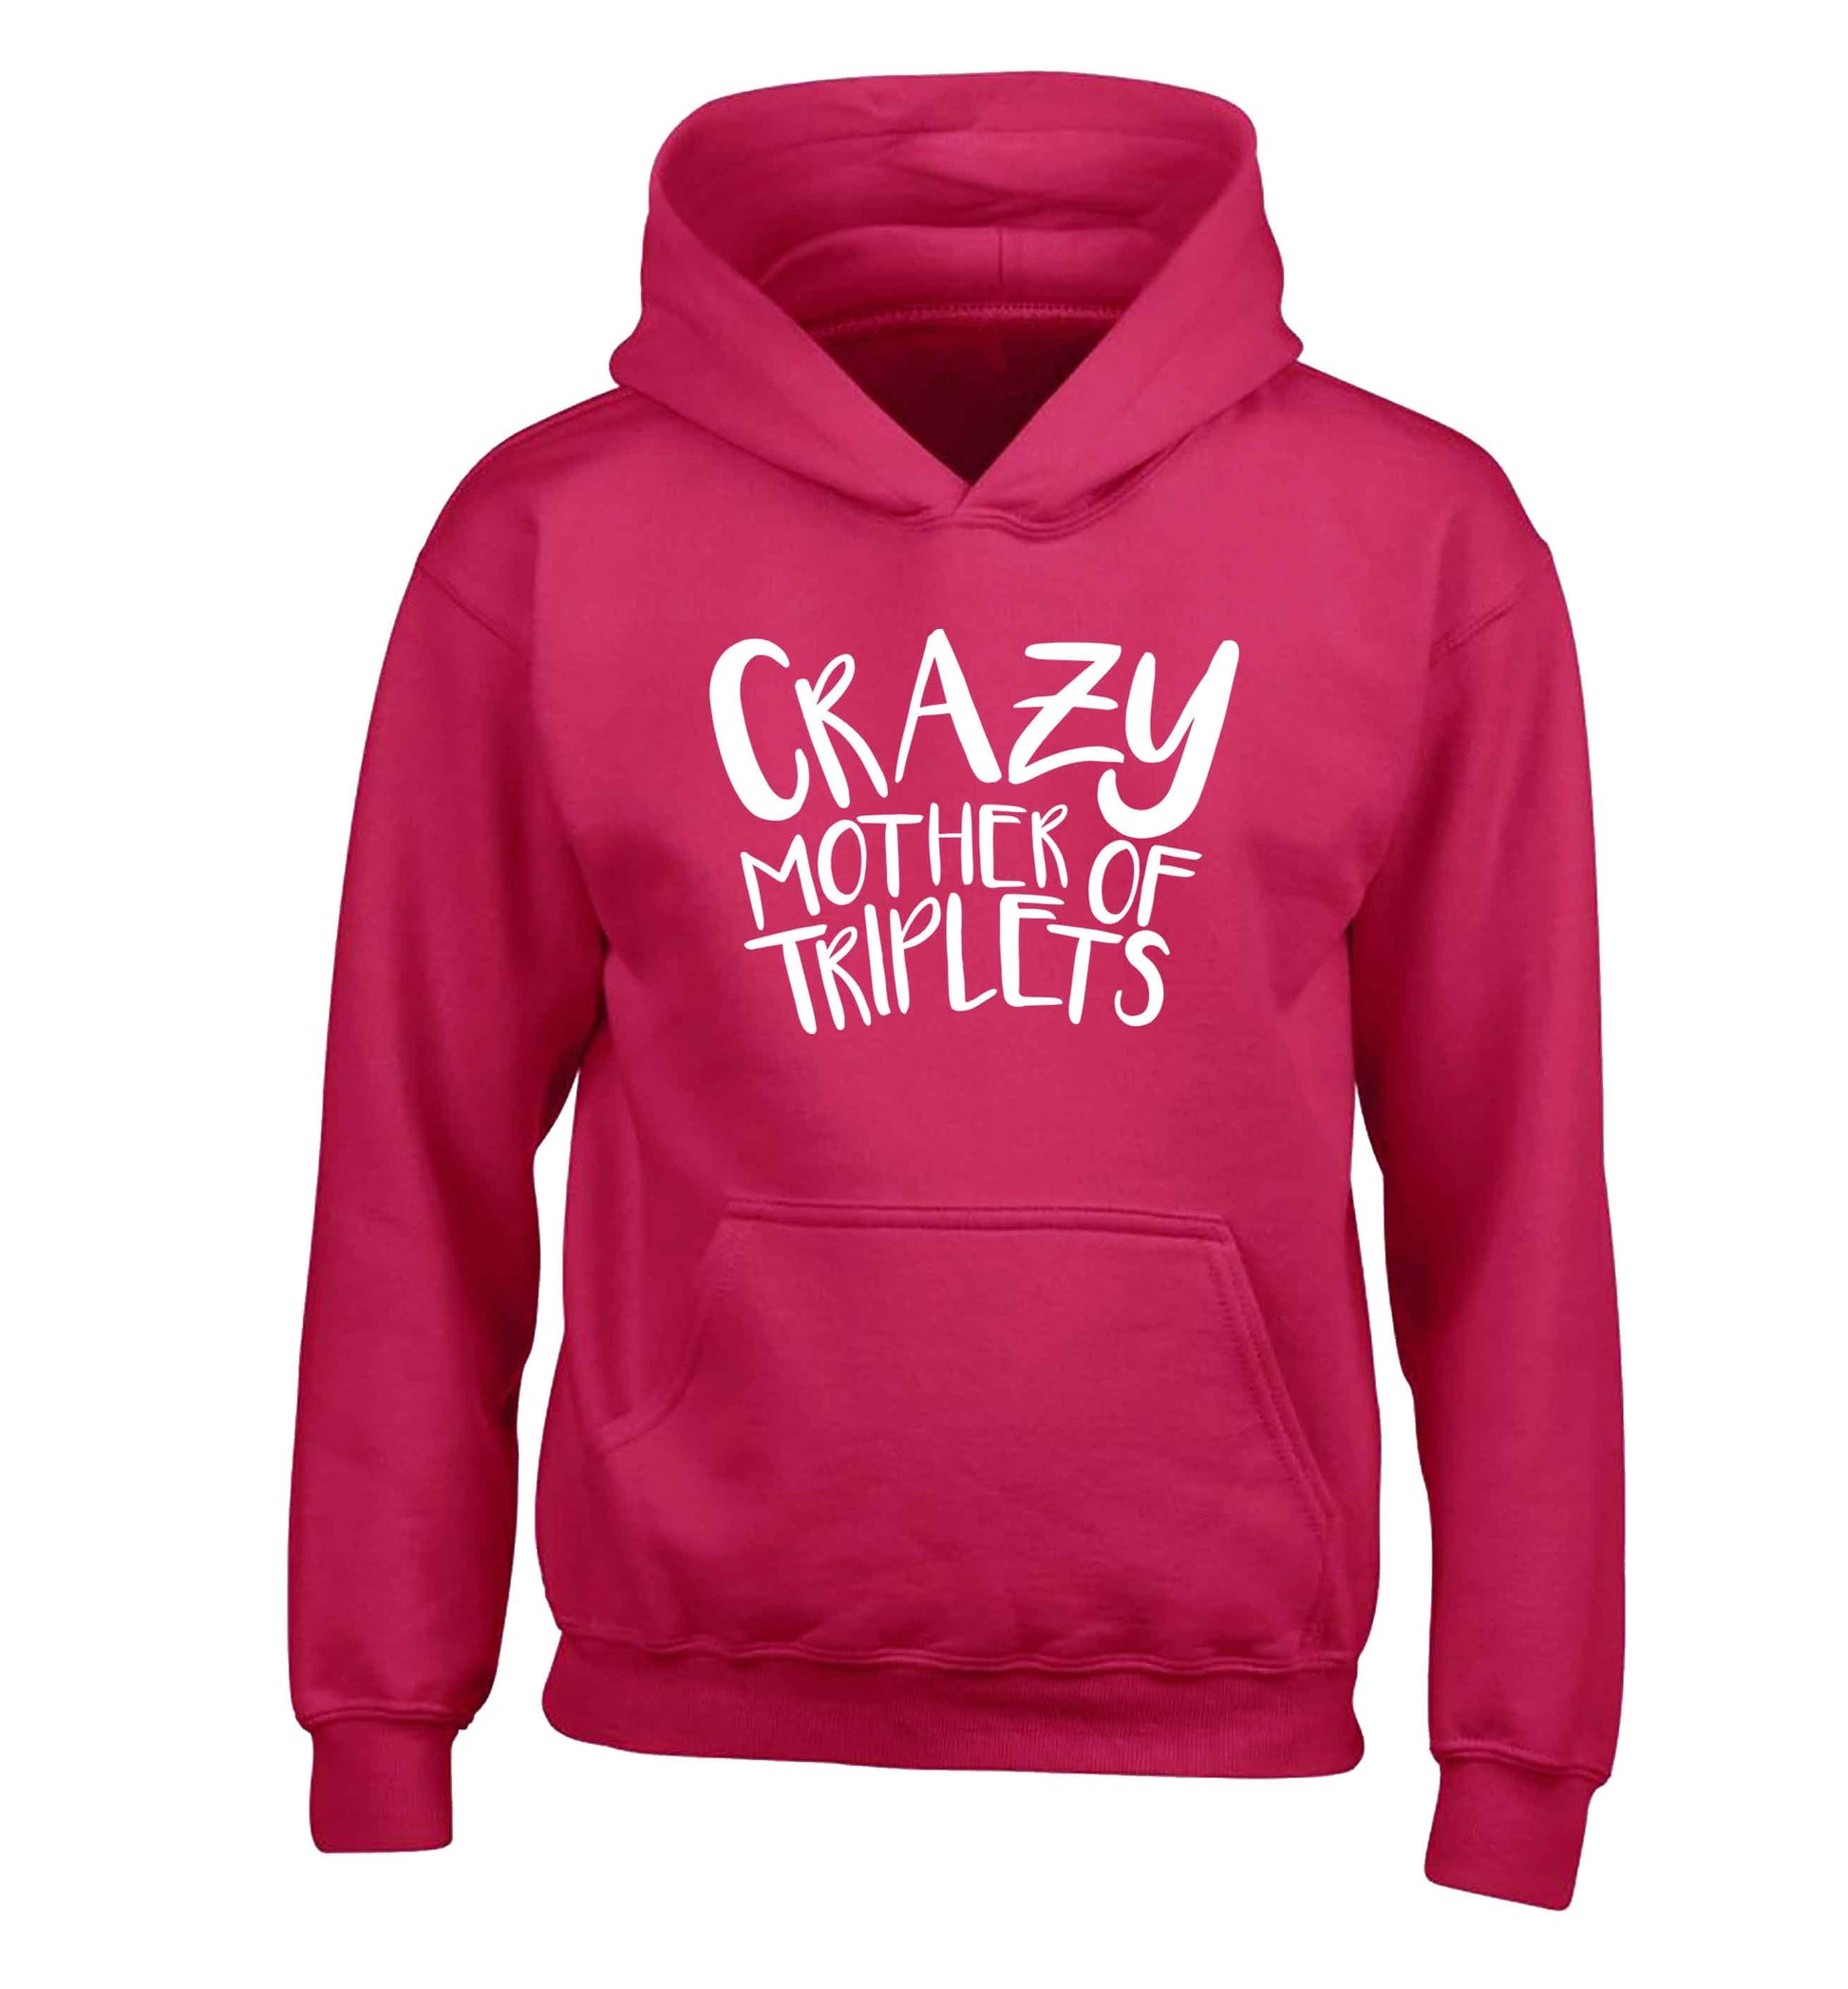 Crazy mother of triplets children's pink hoodie 12-13 Years